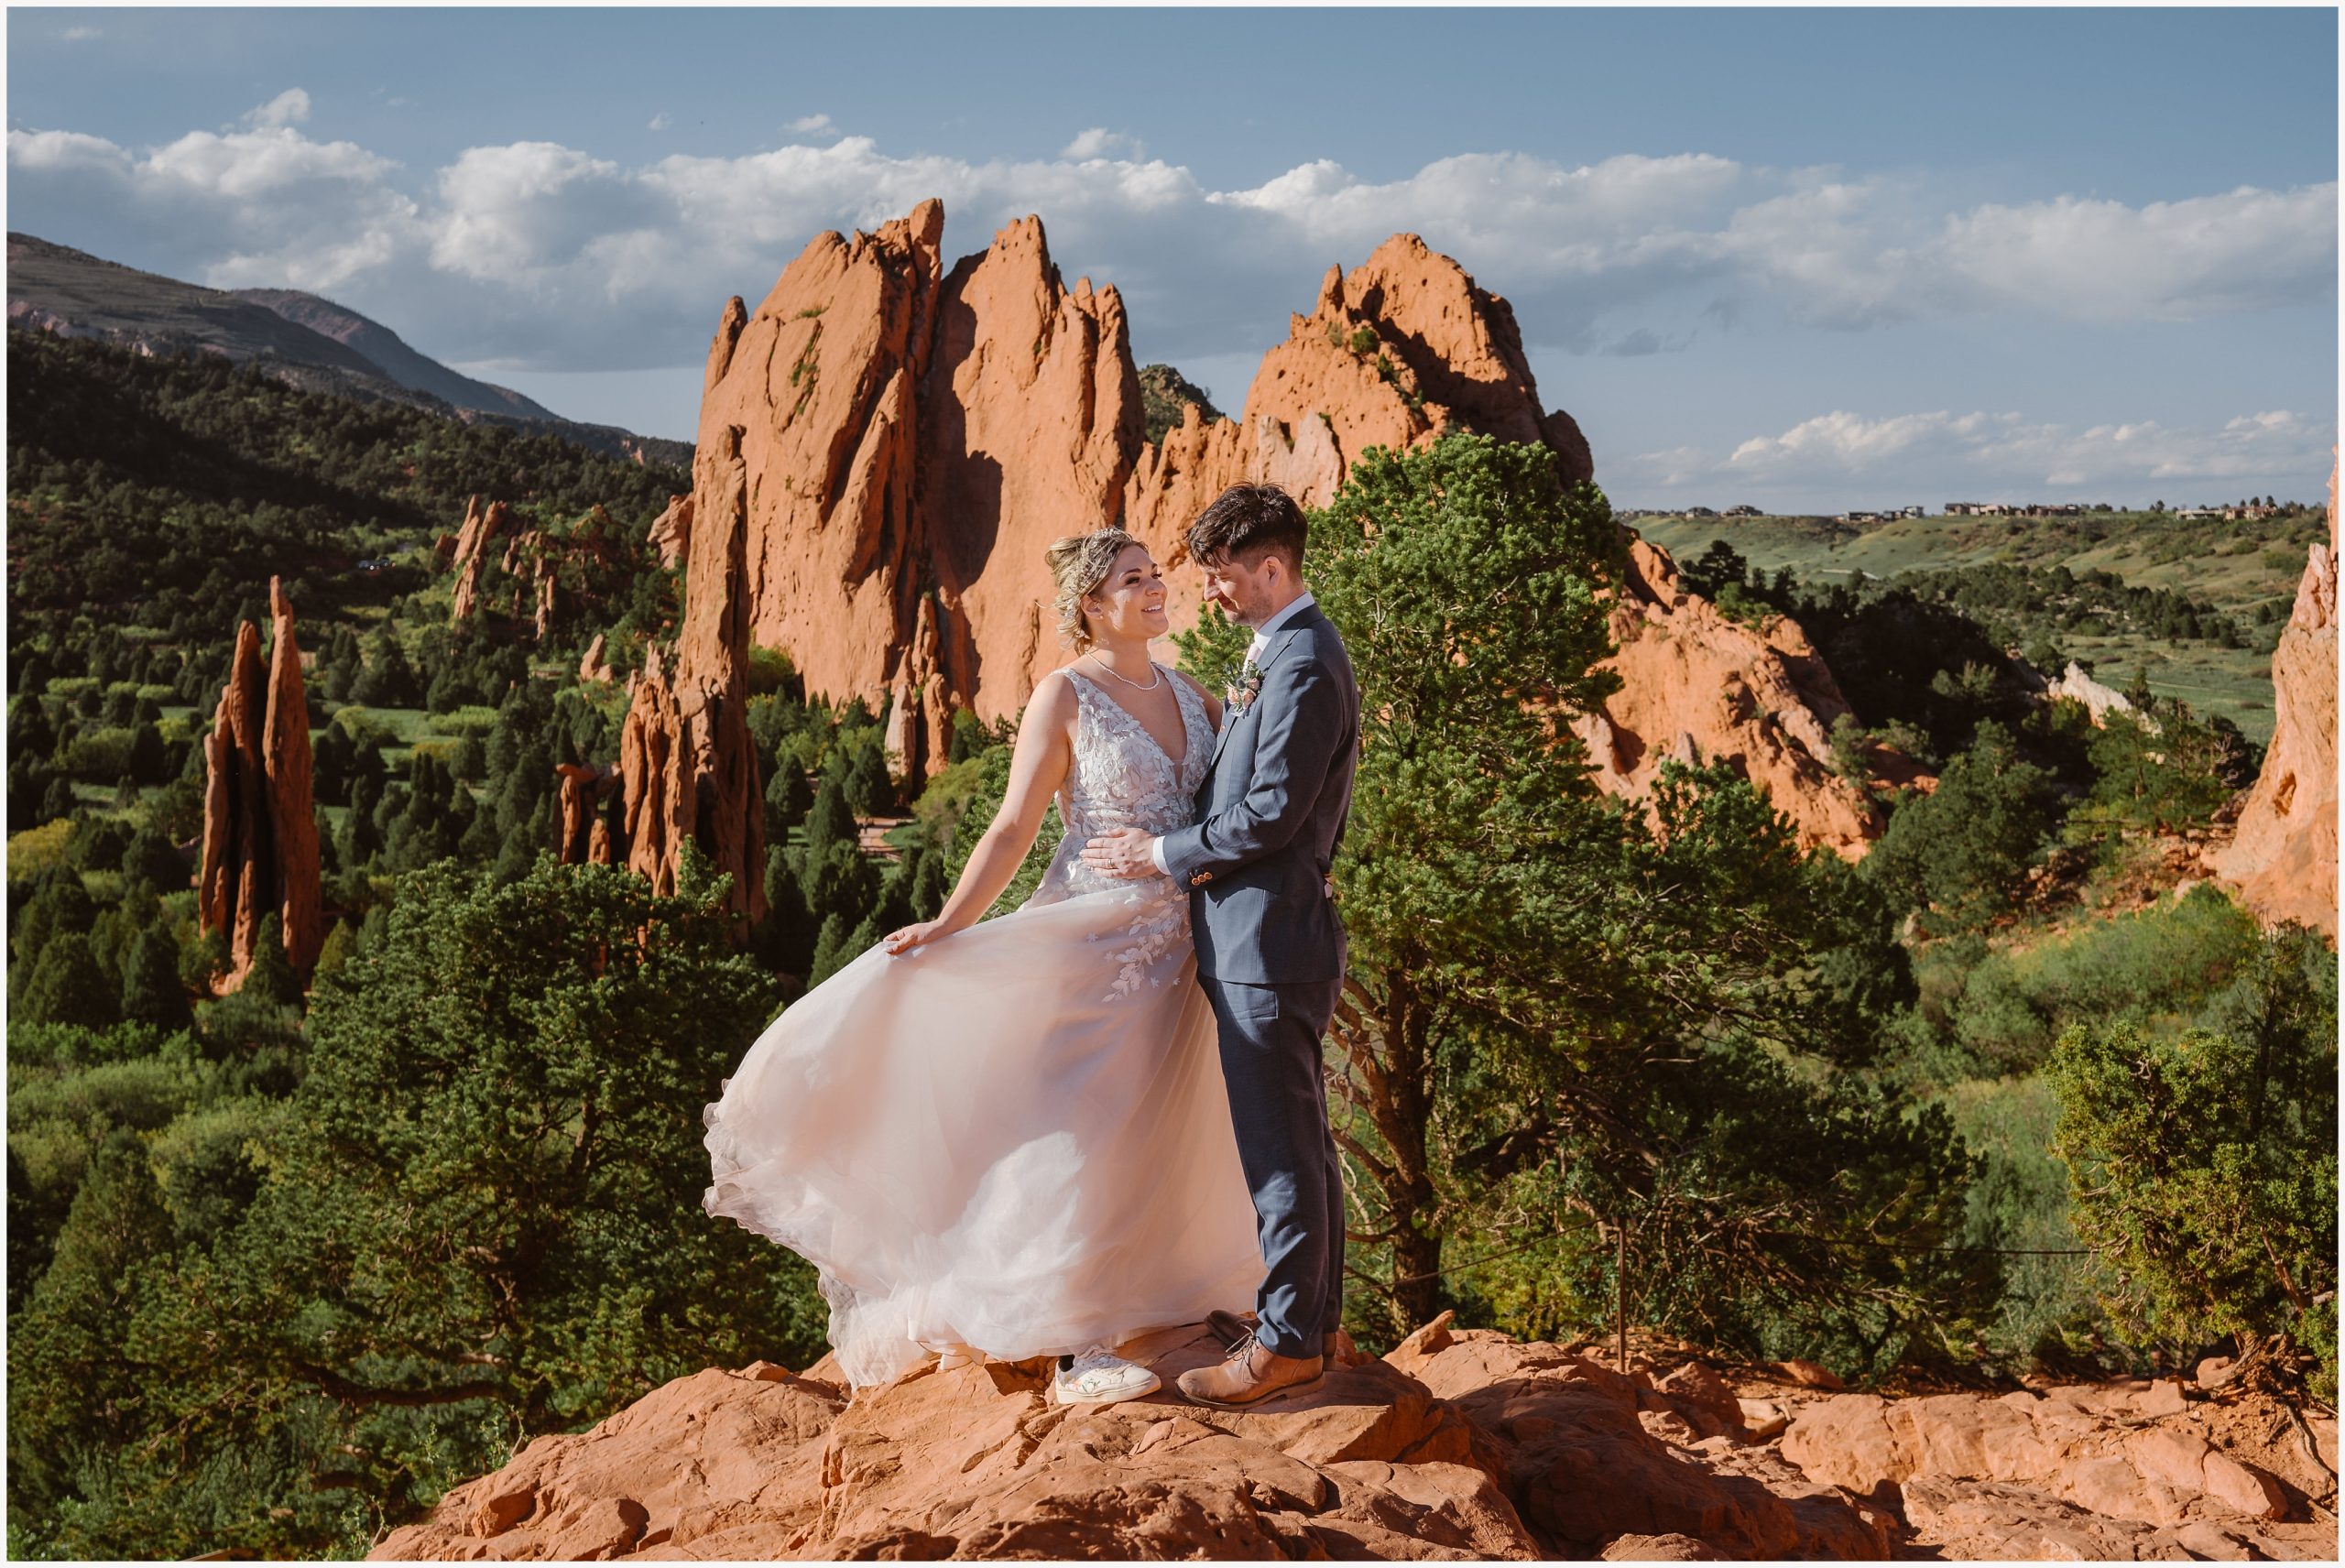 Elopement Guide Colorado Springs wedding dress blowing in the wind